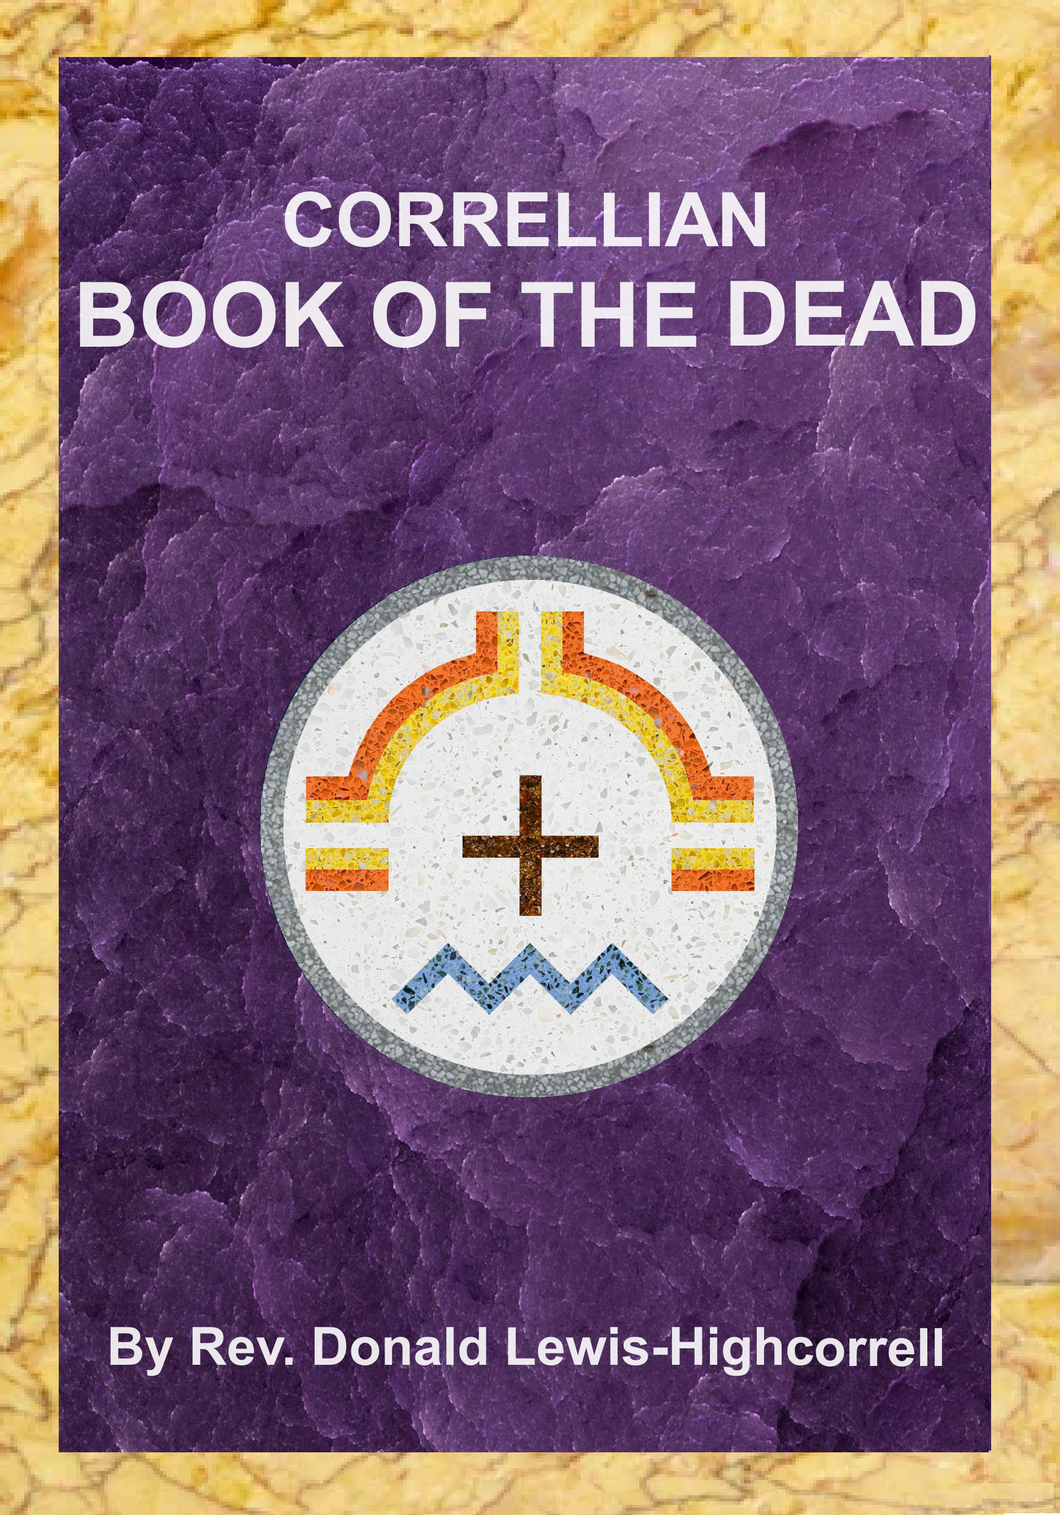 Correllian Book of the Dead - Available for Pre-Order